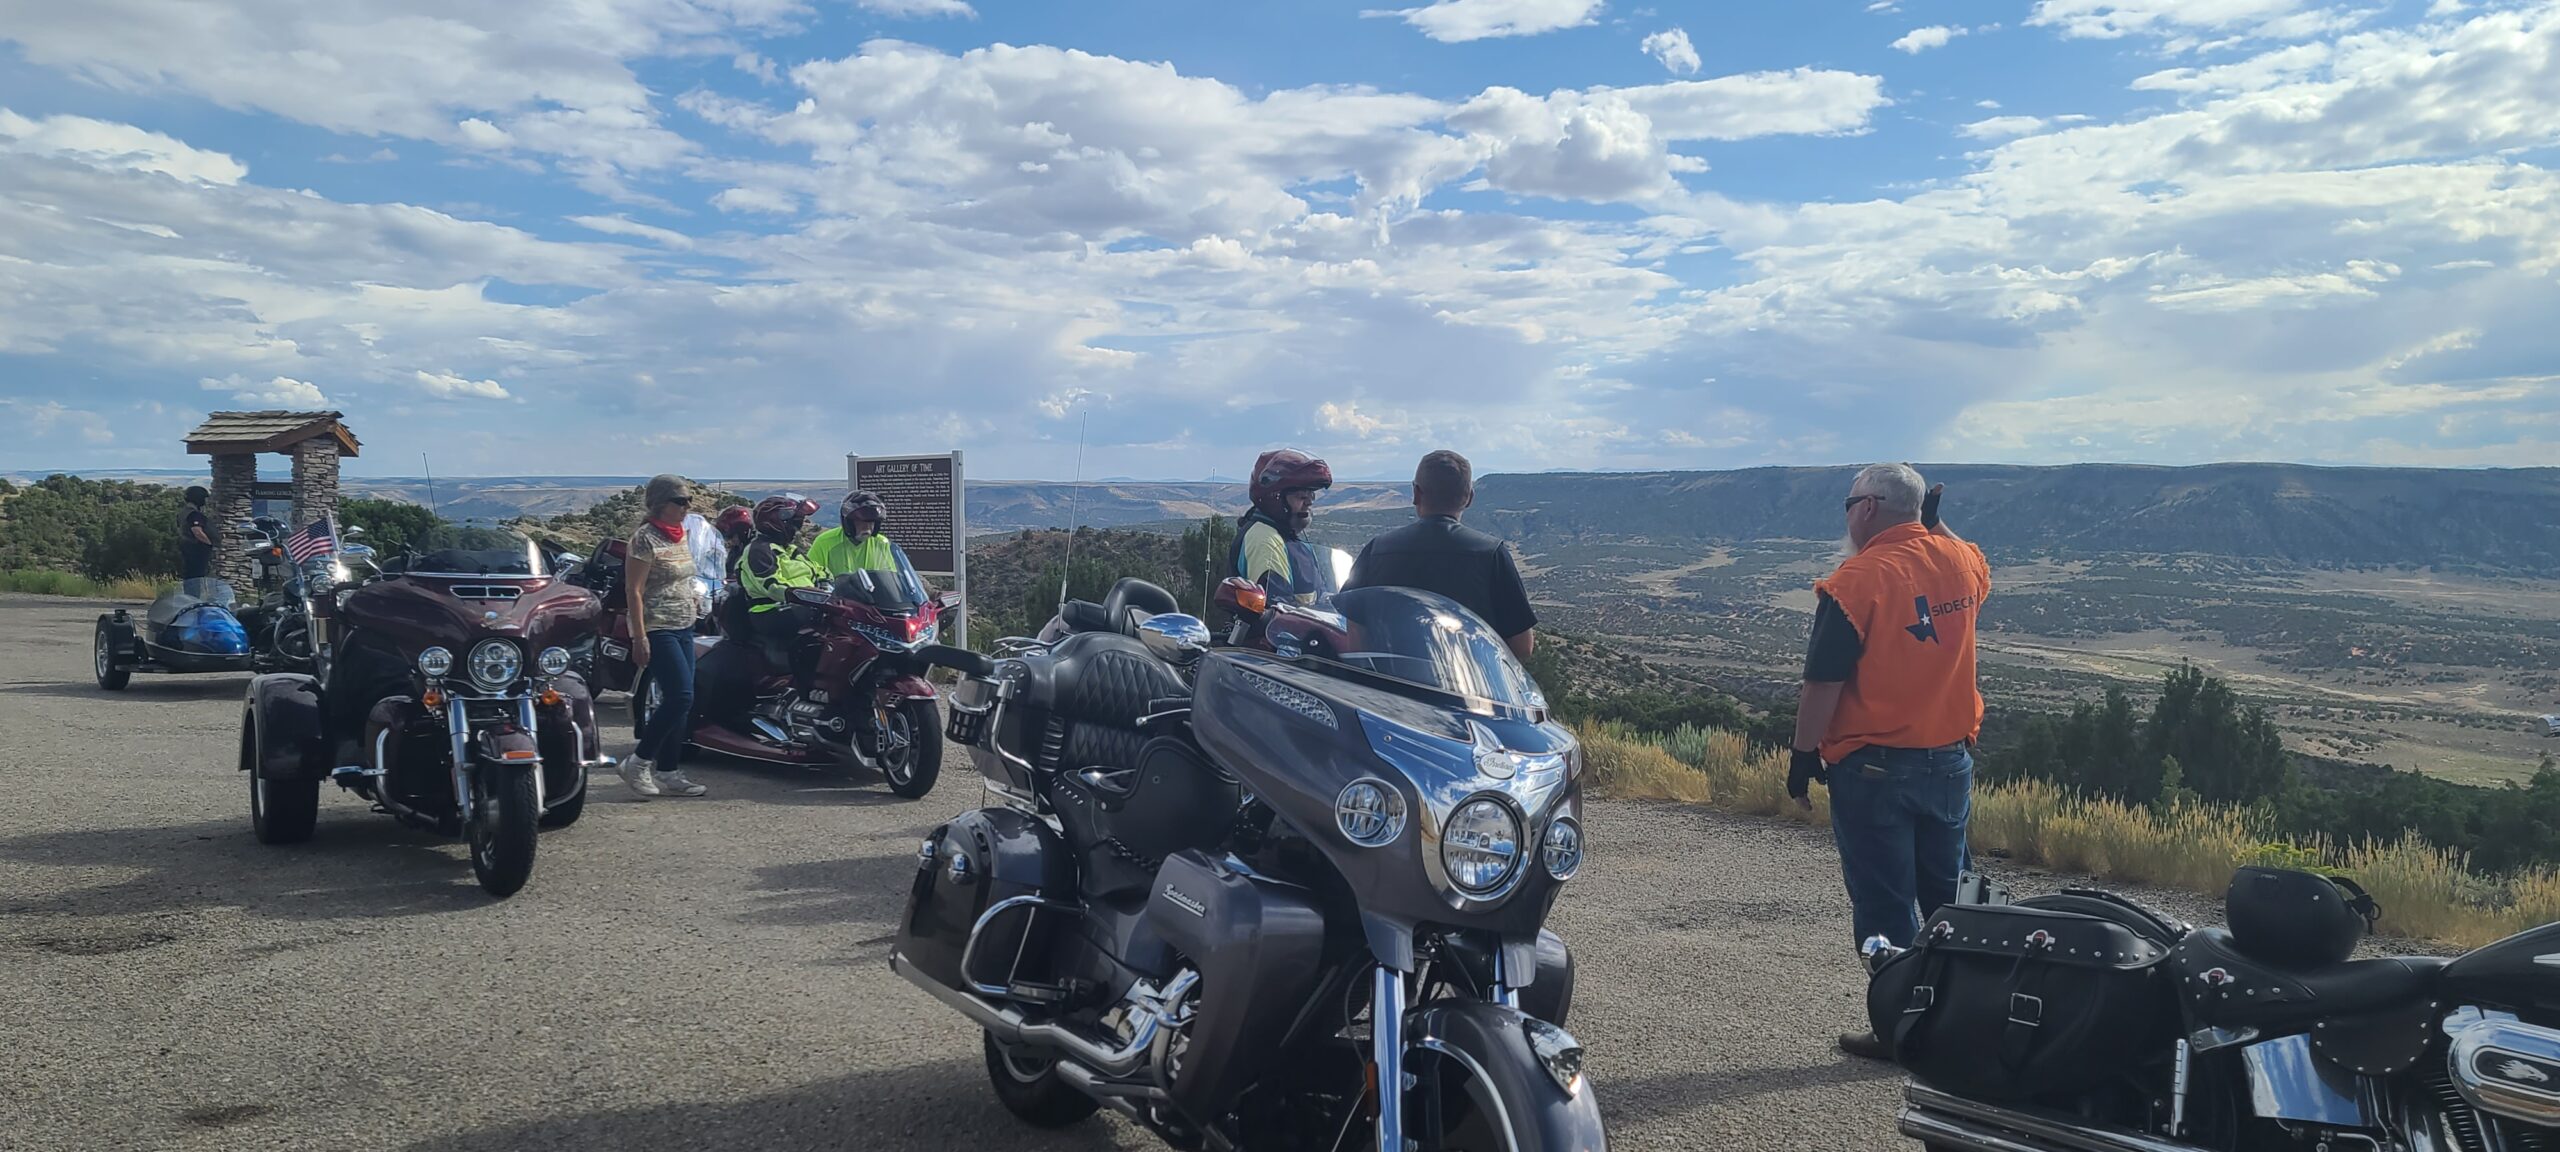 Motorcyclists overlooking a valley from a rest area